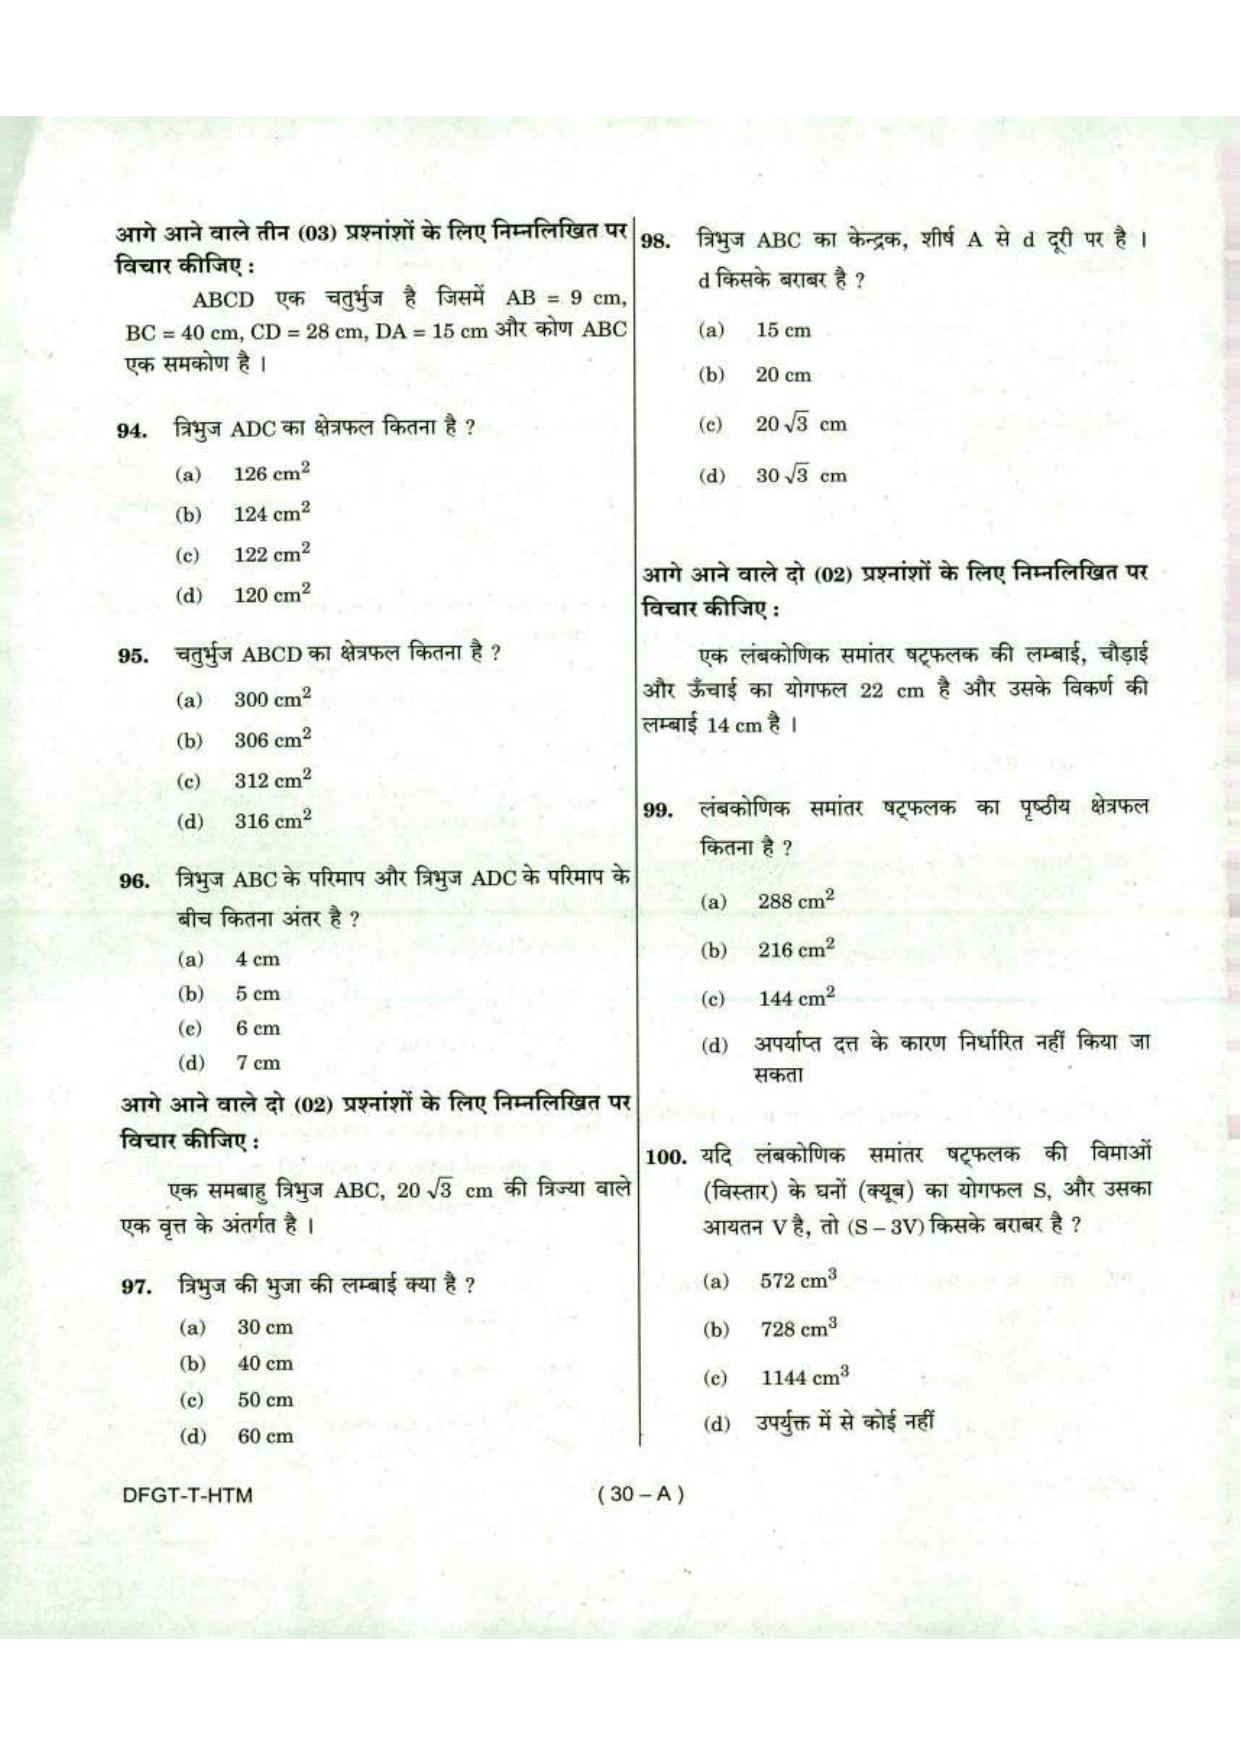 To Download Arunachal Pradesh Police Constable Elementary Mathematics Model Papers - Page 30